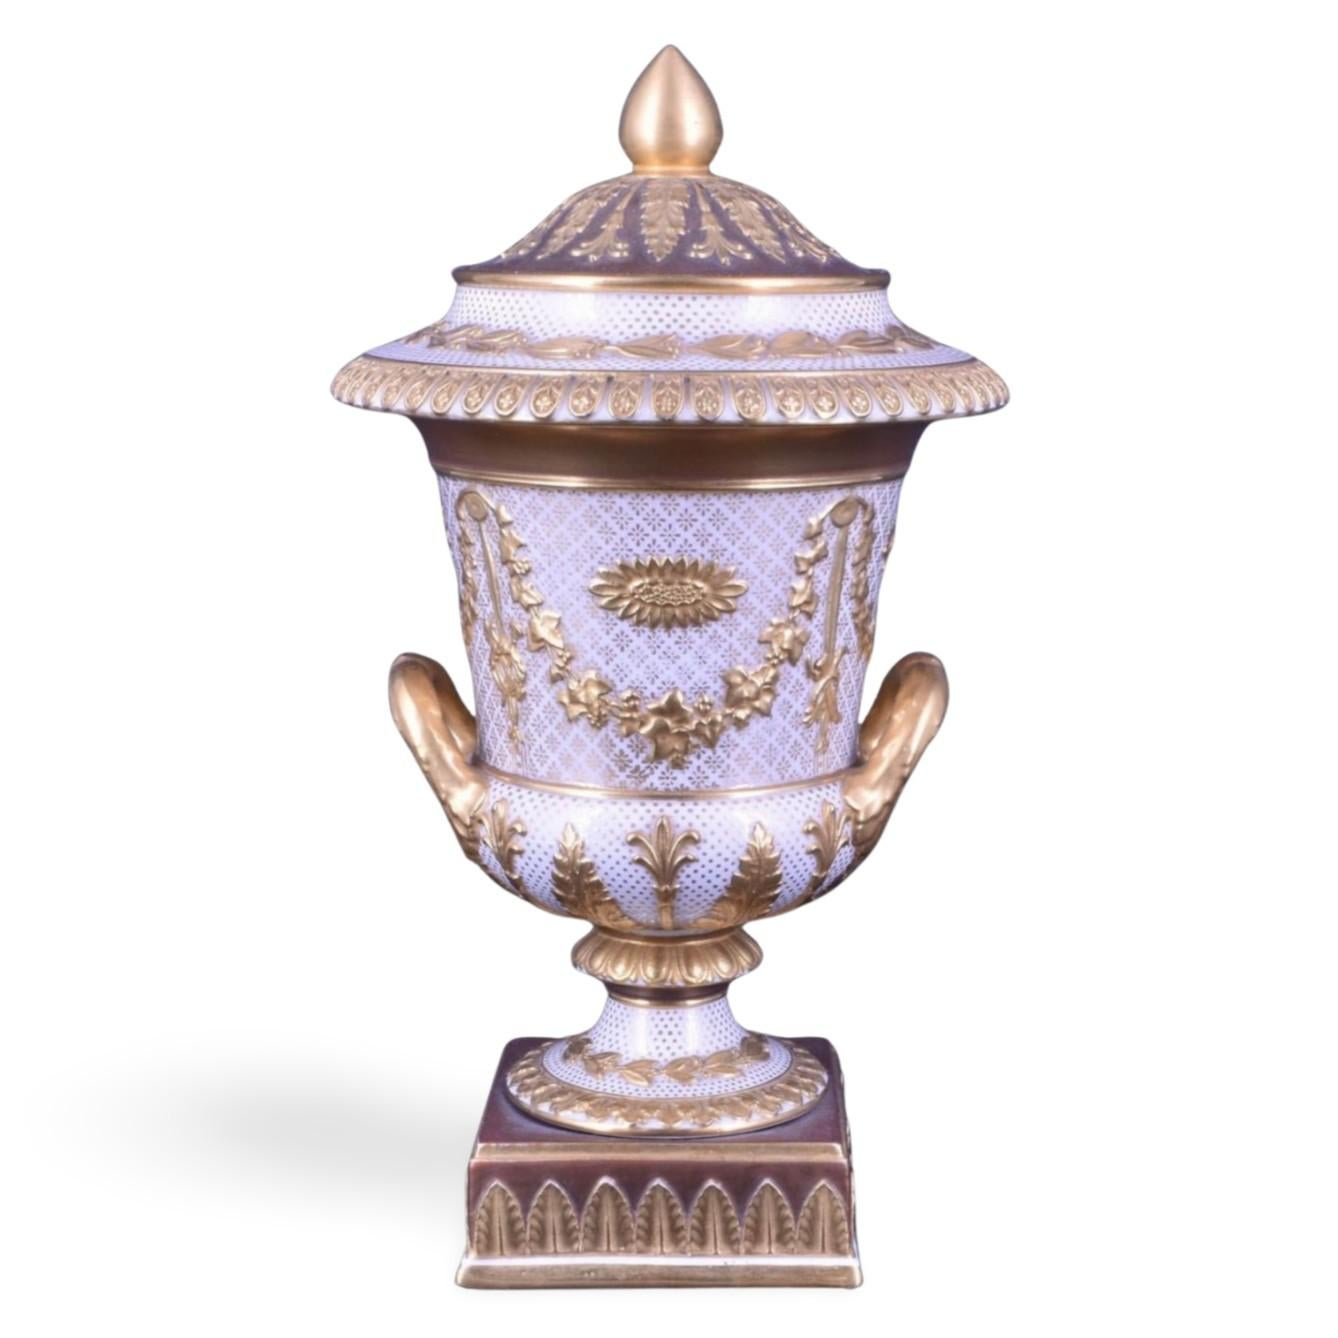 English Victoriaware campana Vase in White with Gilt Decoration. Wedgwood C1880. For Sale